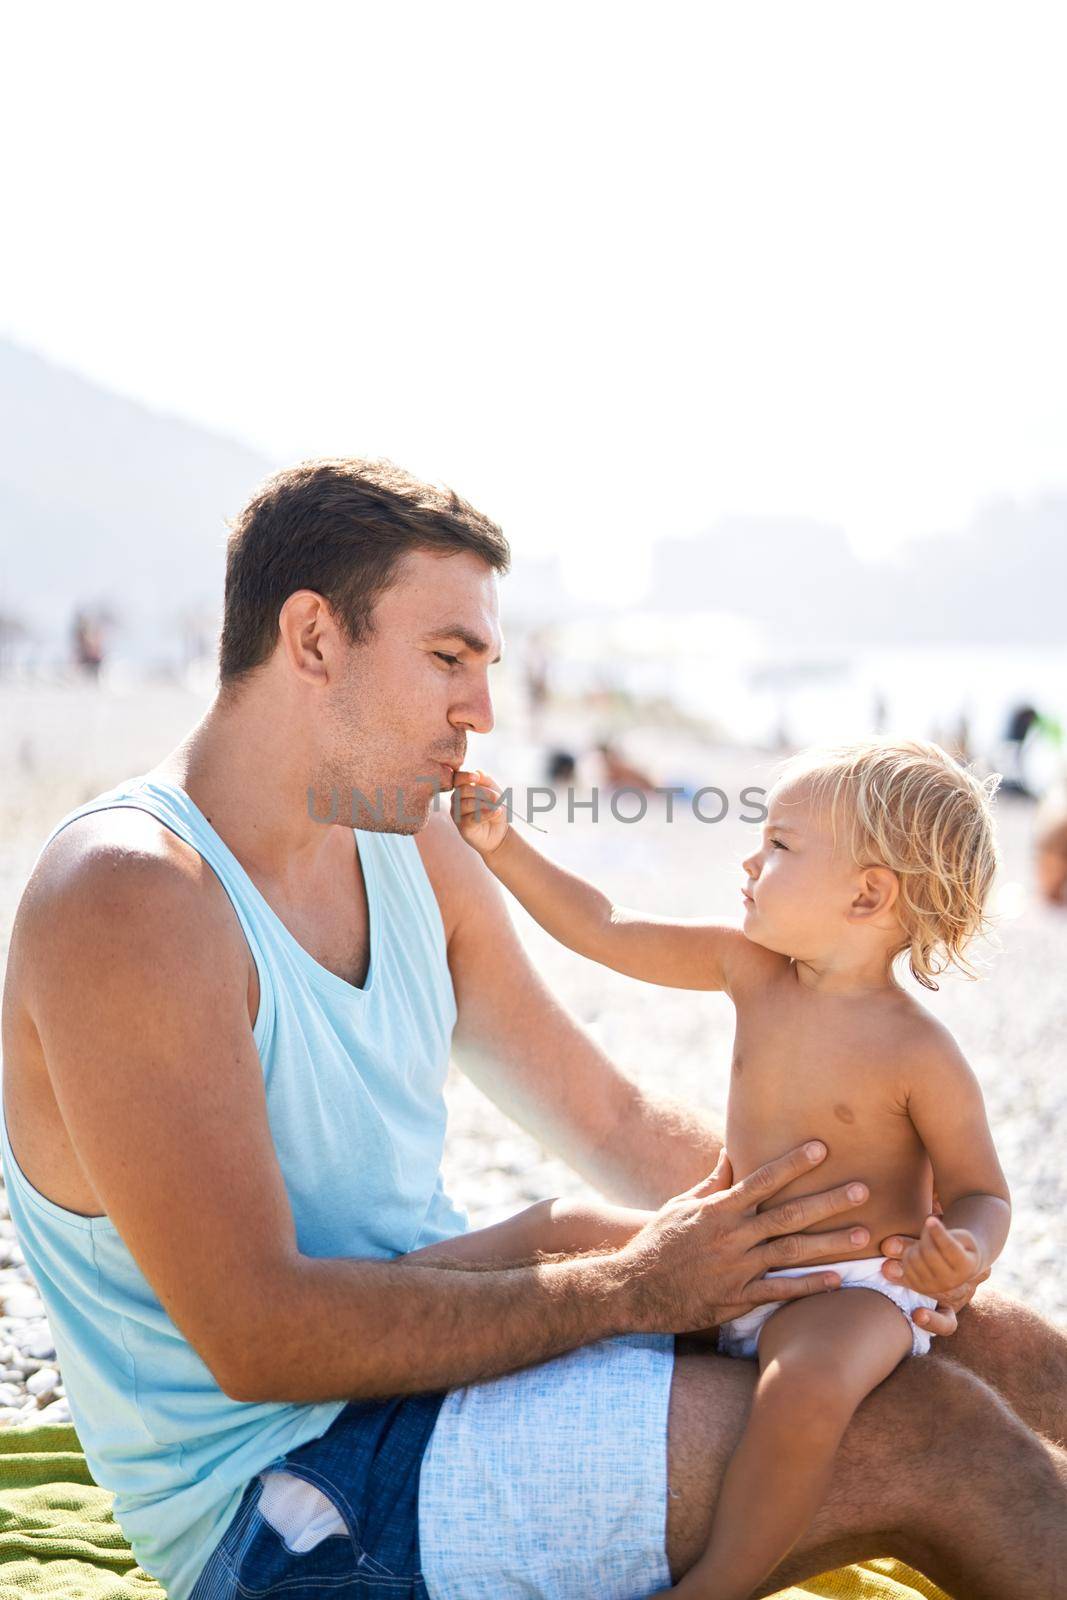 Little daughter spoon-feeds her dad while sitting on the beach. High quality photo